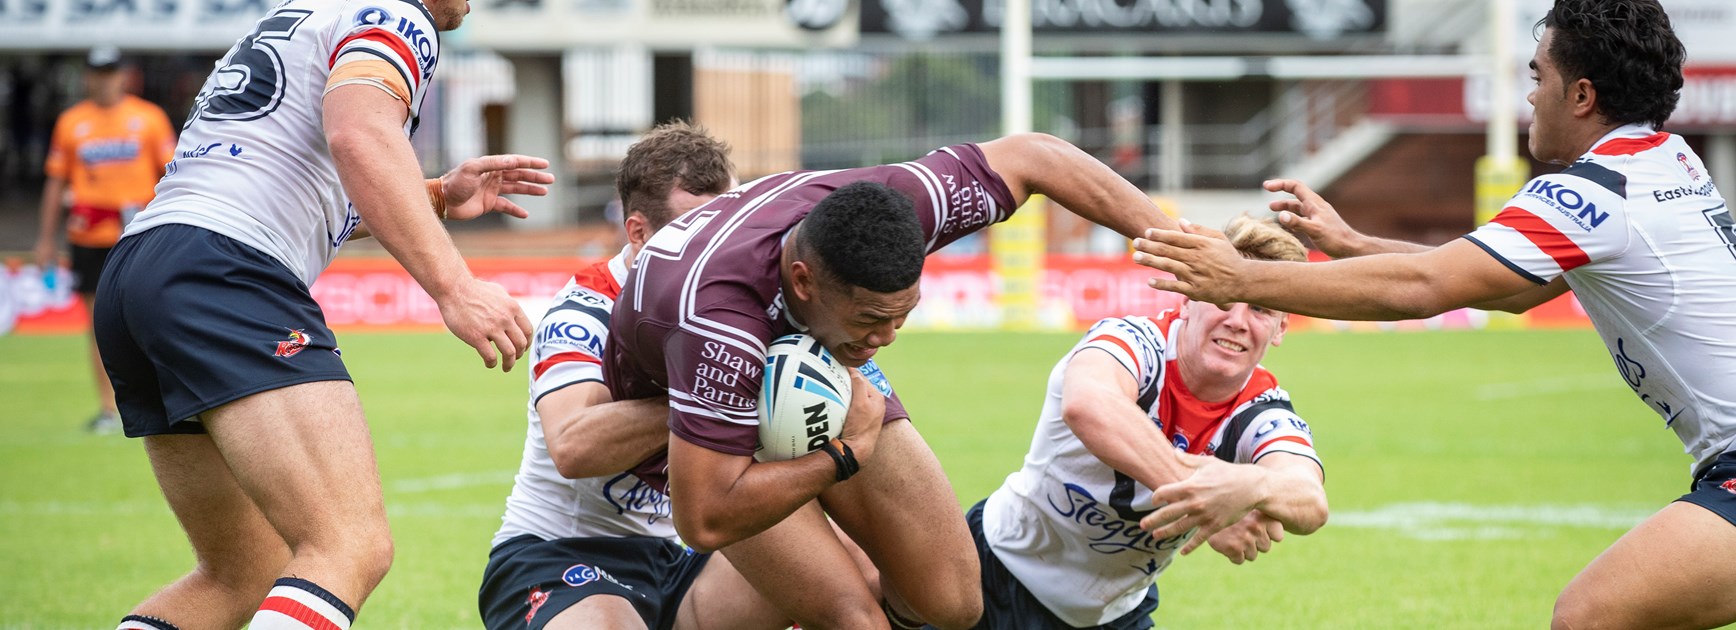 Sea Eagles go down to Roosters in Jersey Flegg